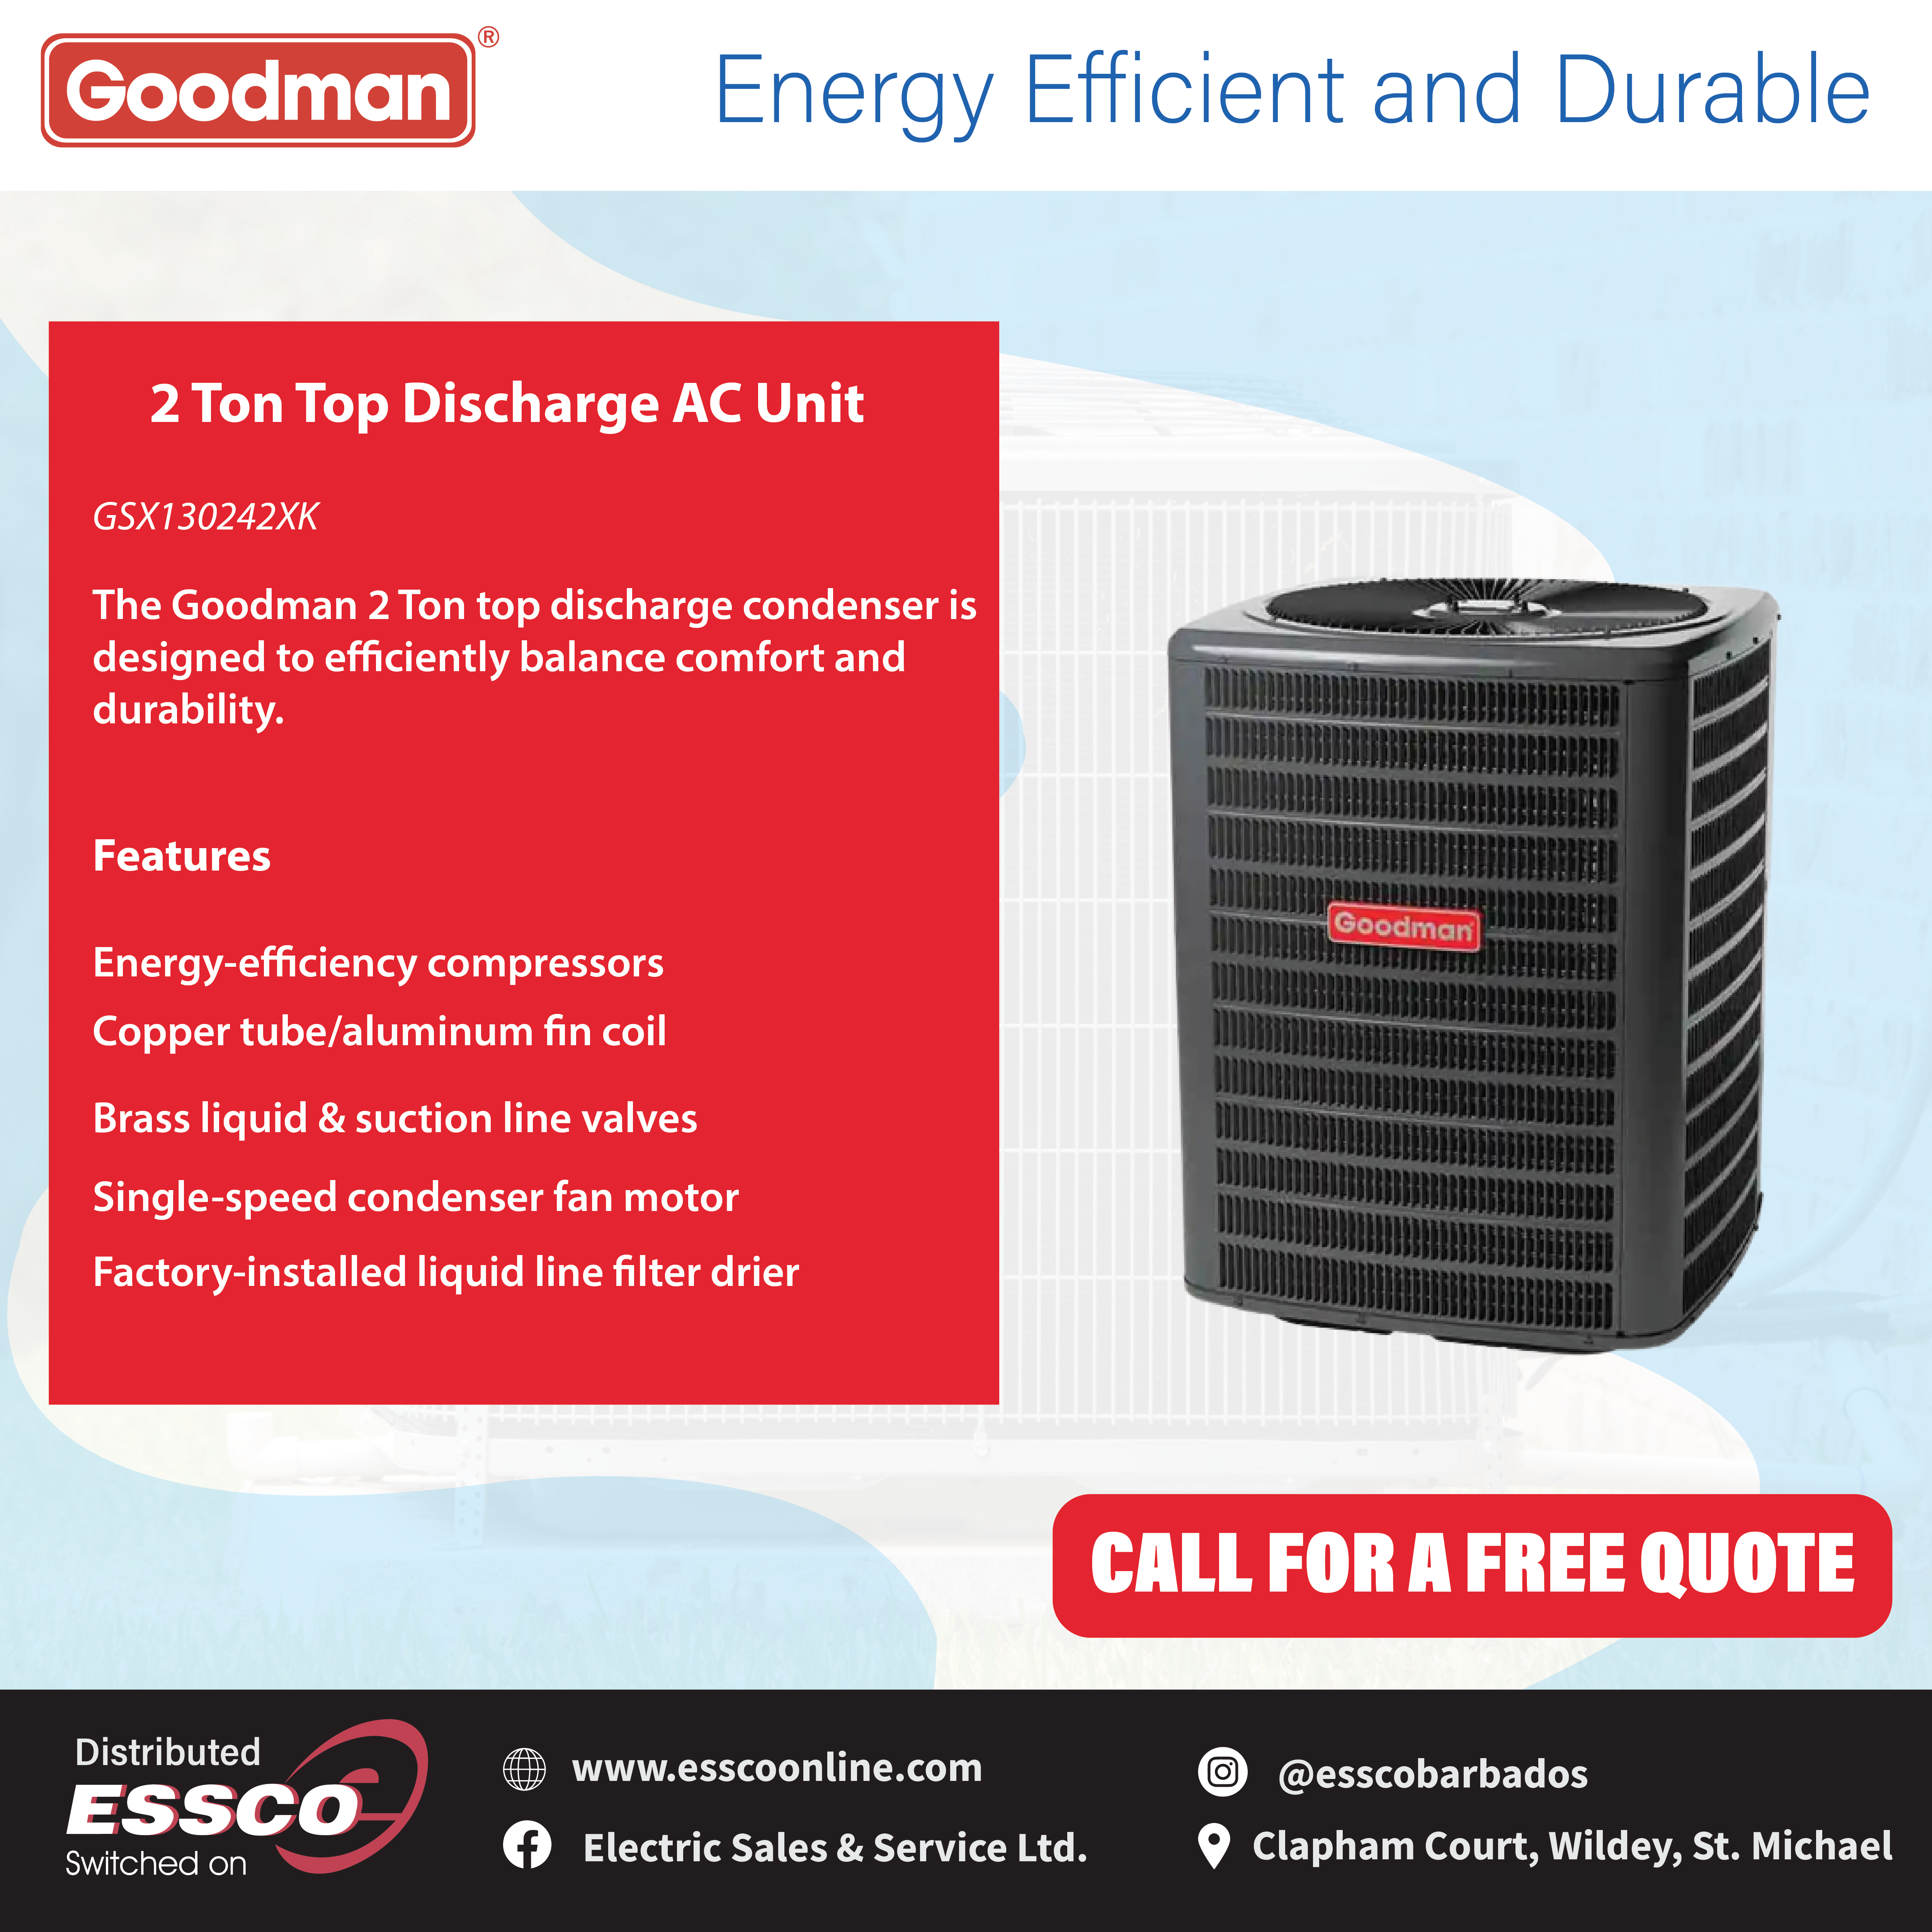 Electric Sales & Service Ltd (ESSCO) - Air Conditioning Equipment & Systems-Service & Repairs